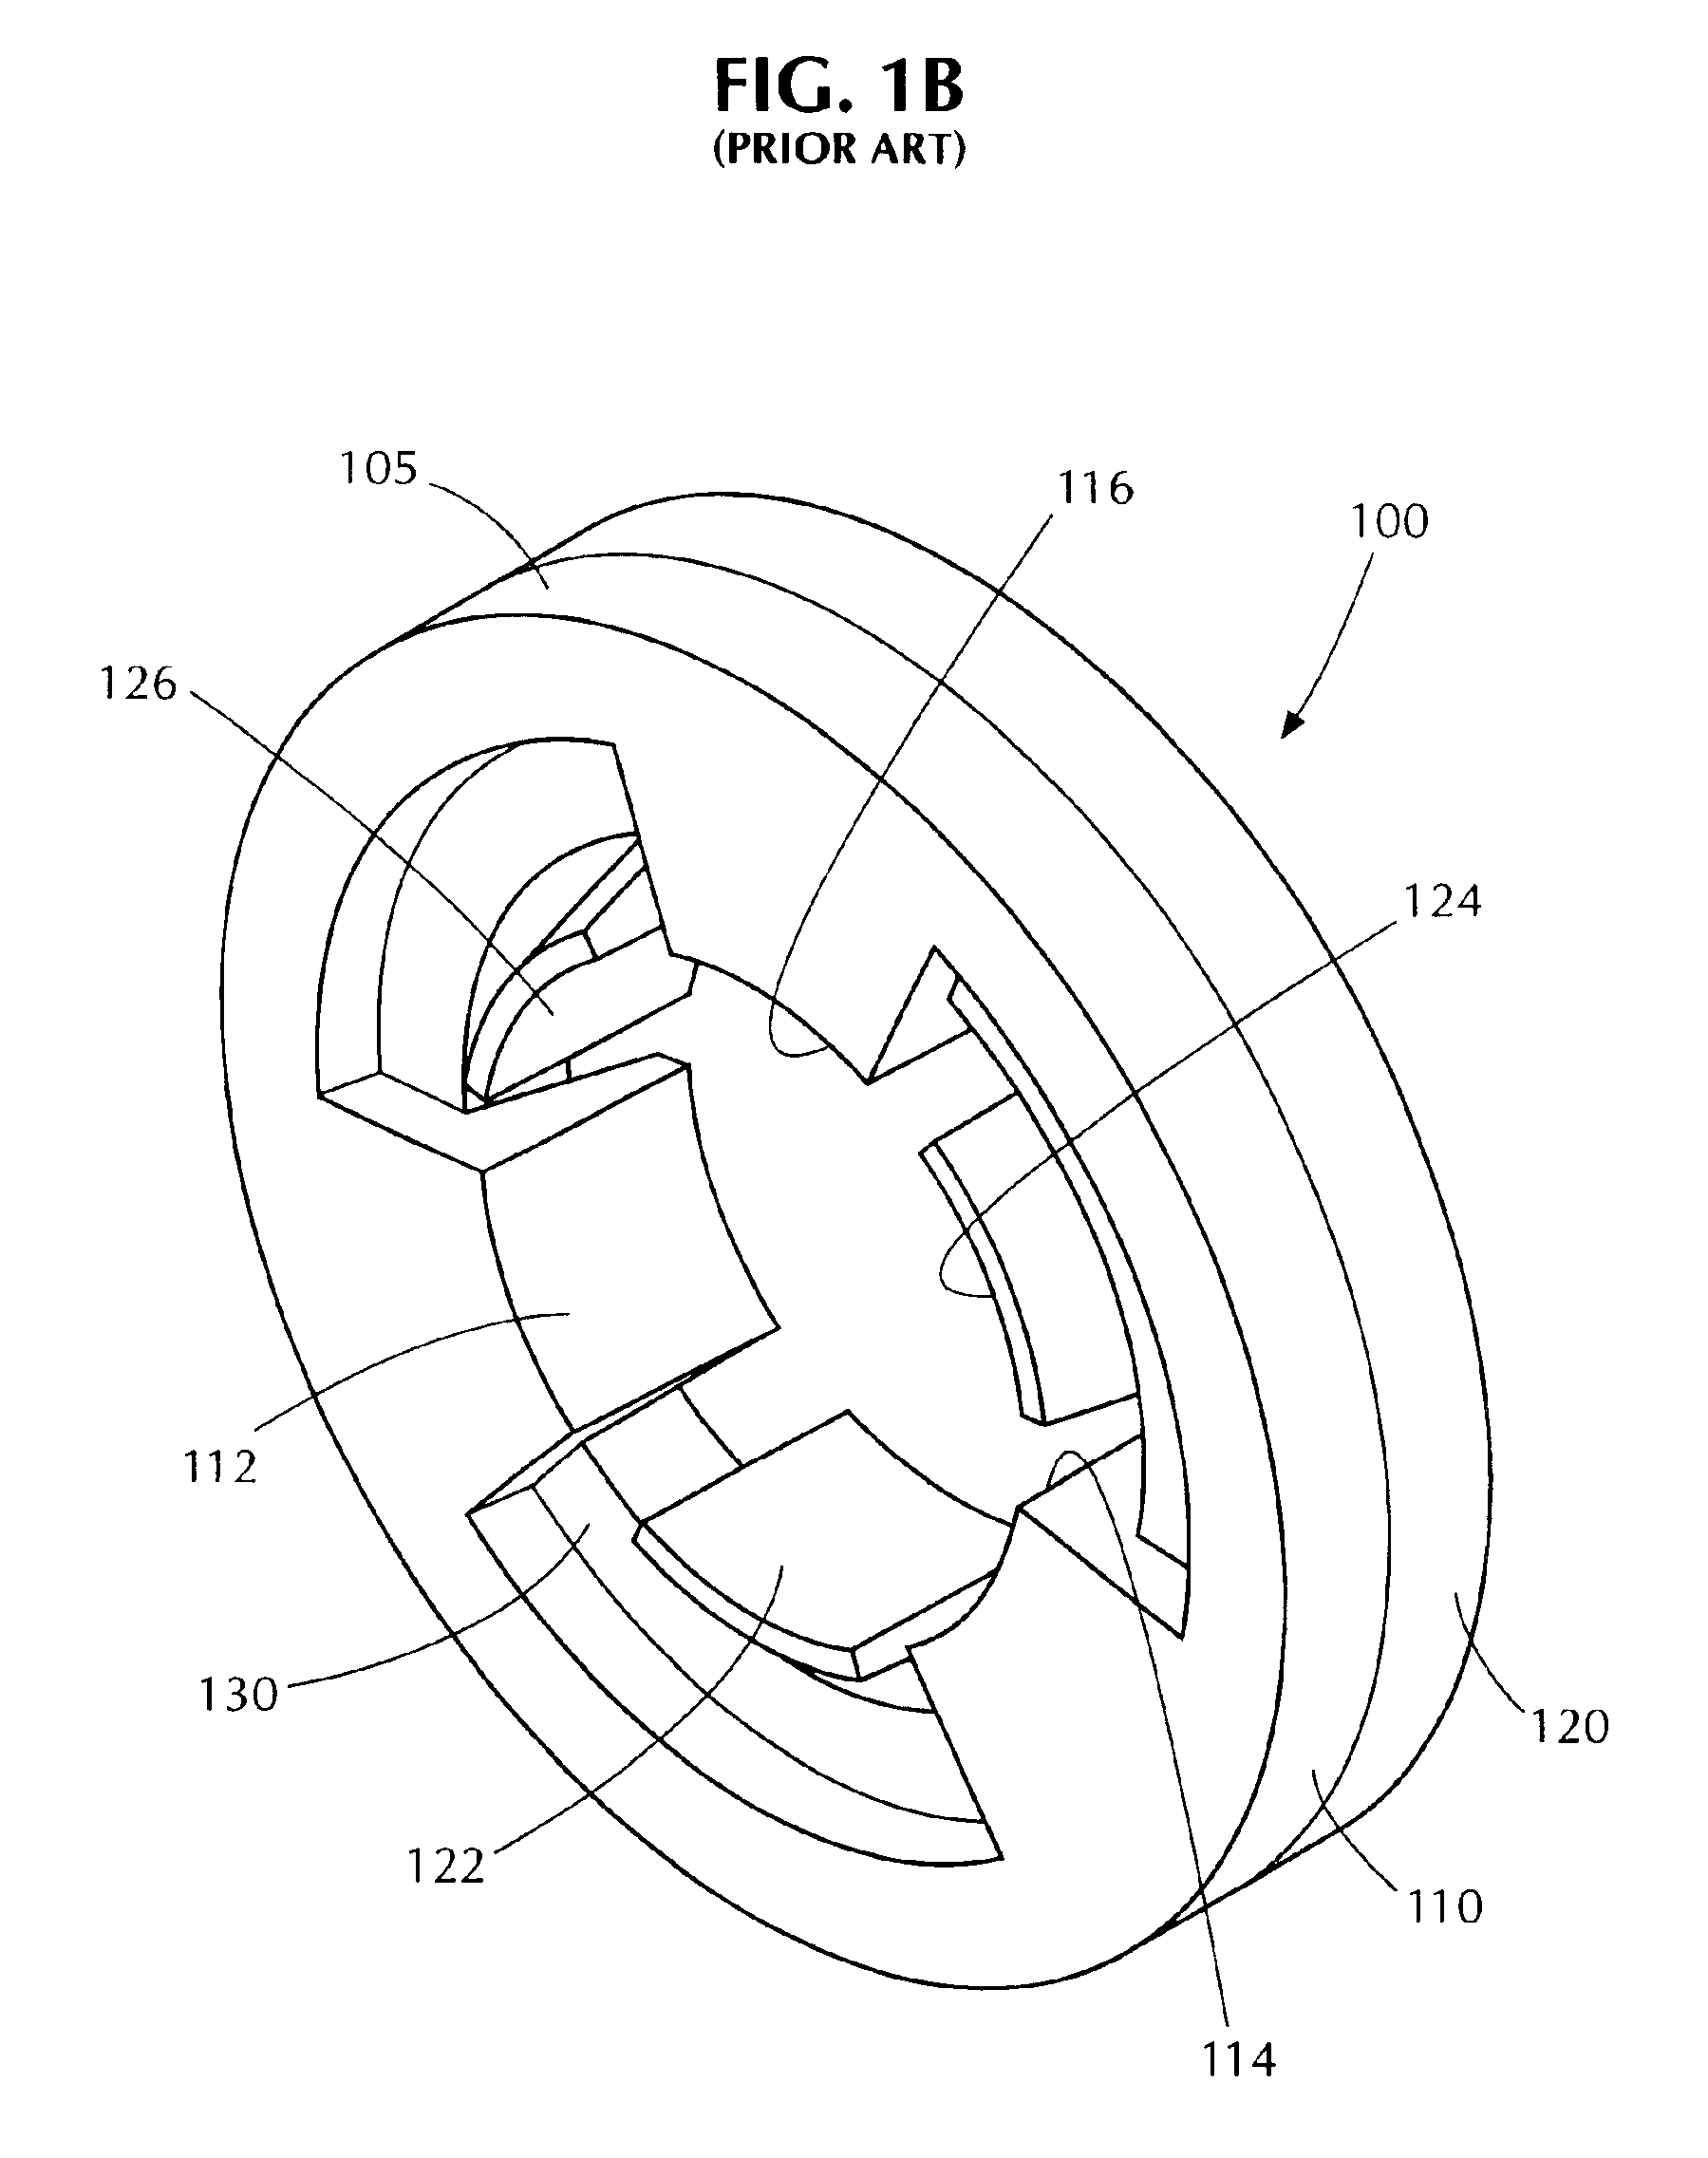 Polyphase claw pole structures for an electrical machine